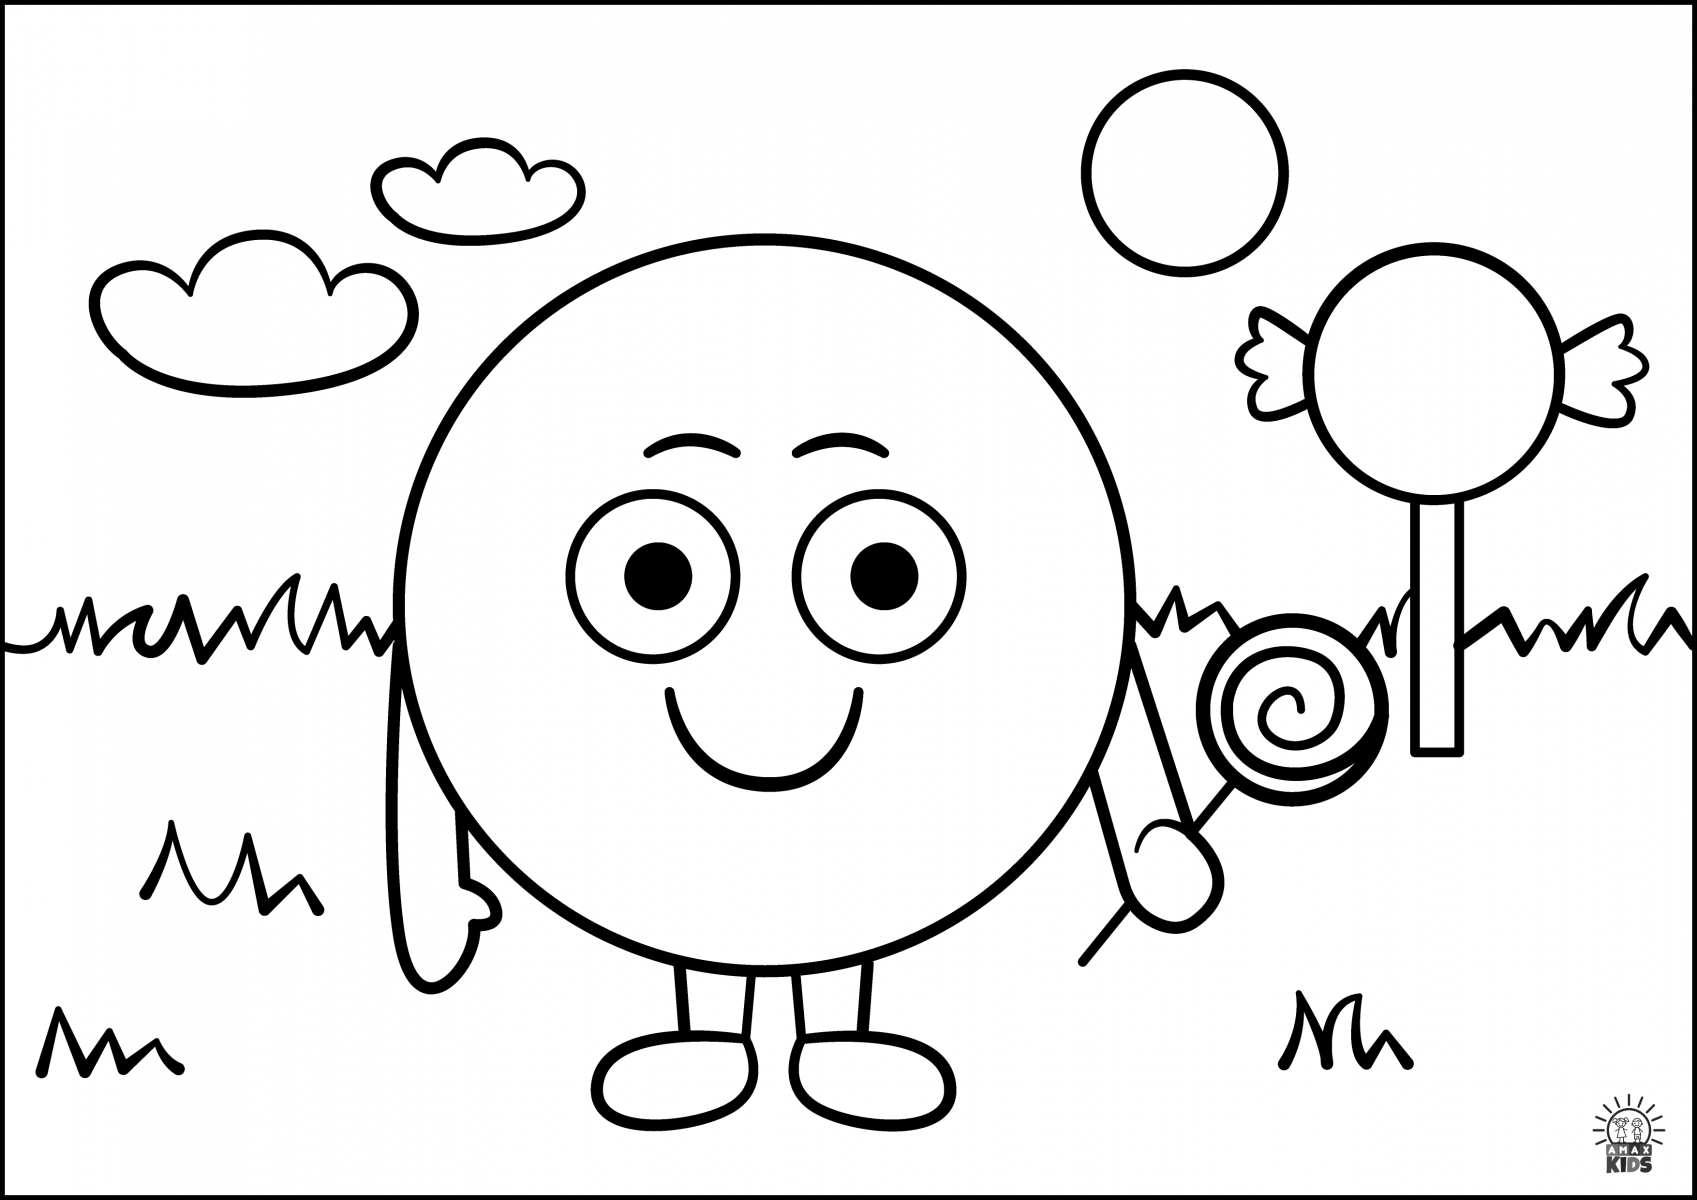 Coloring pages for kids â shapes amax kids